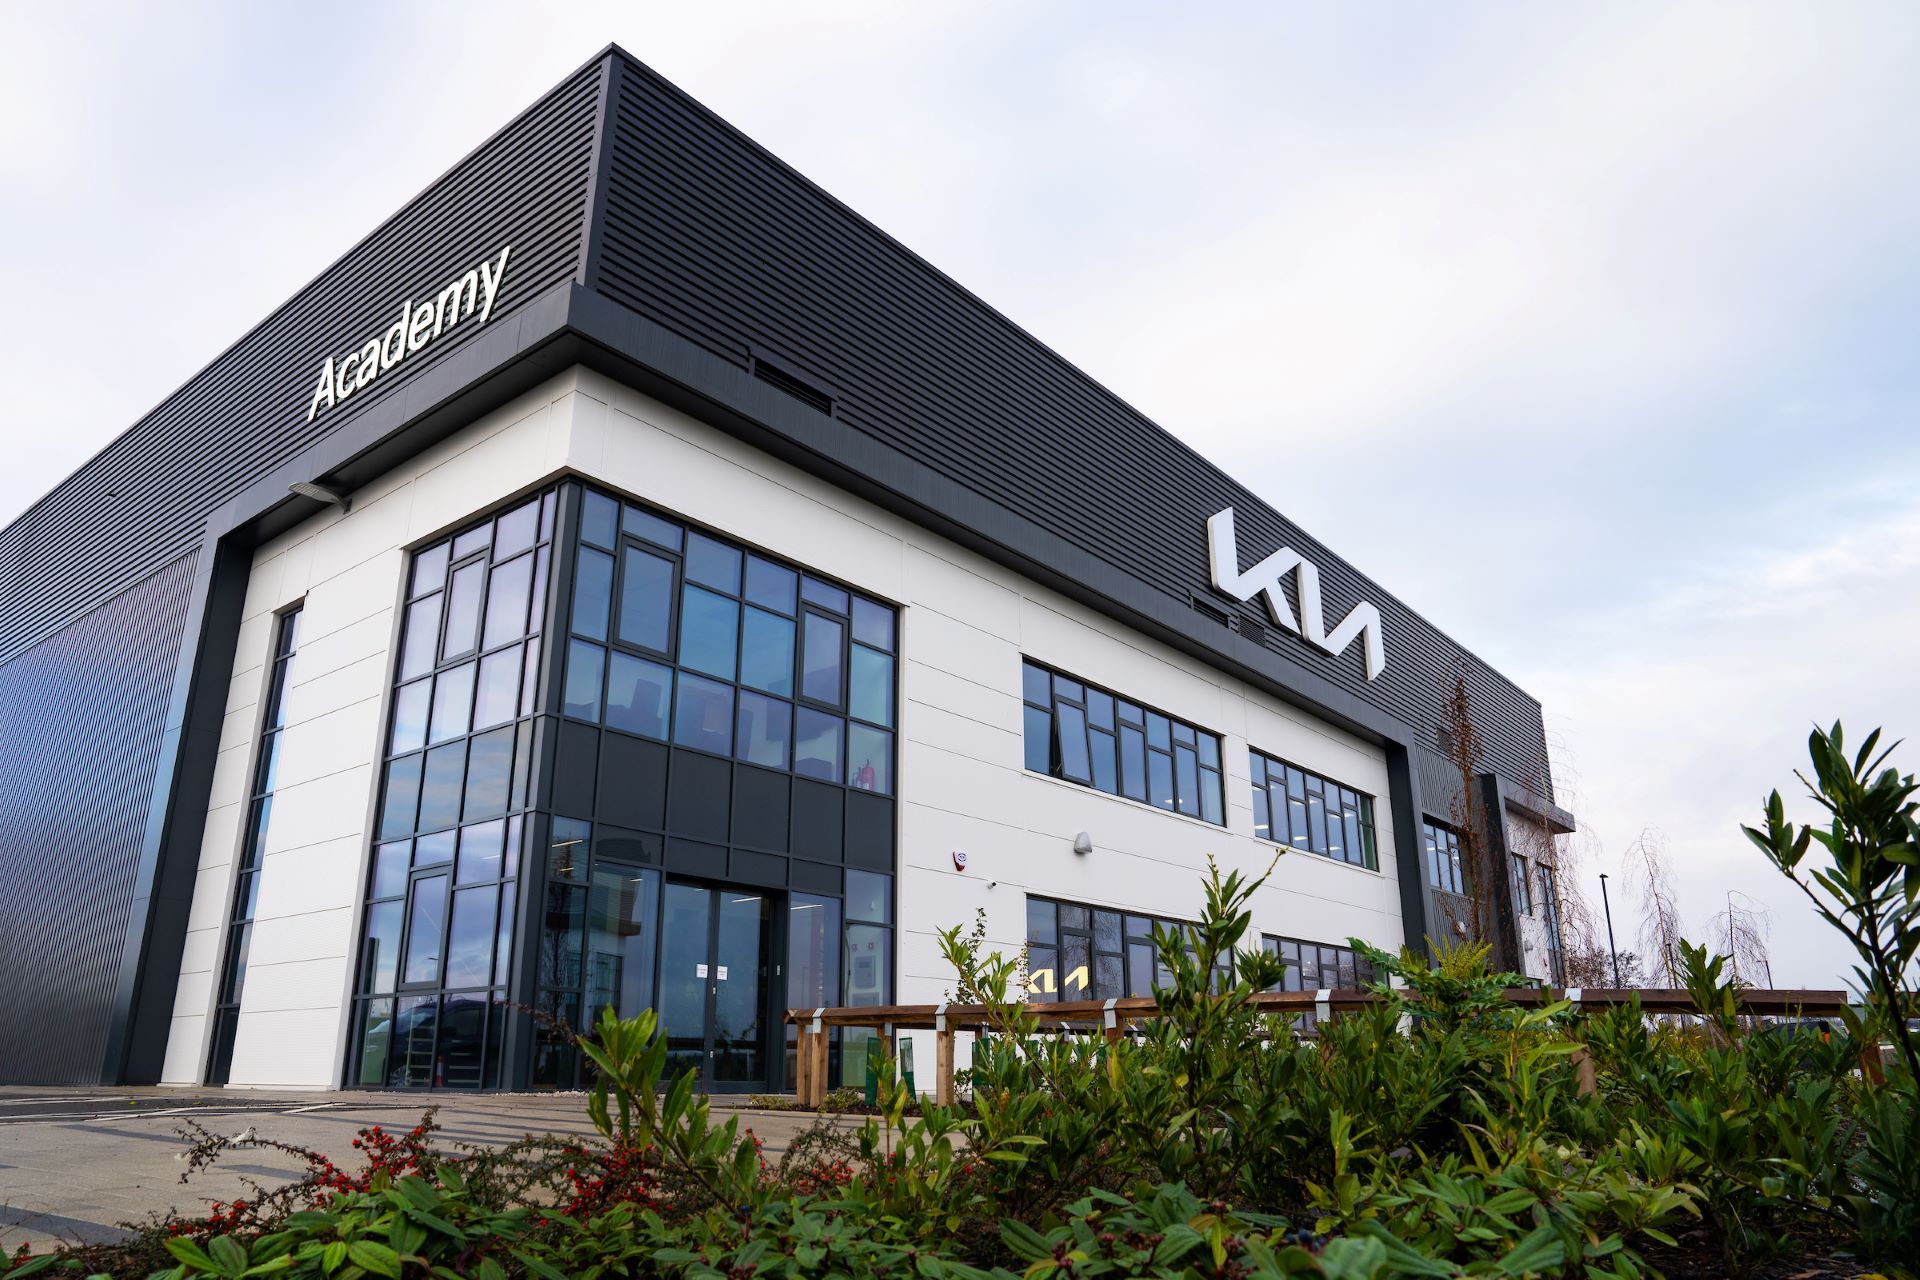 Kia opens new state-of-the-art technical training academy in Derby